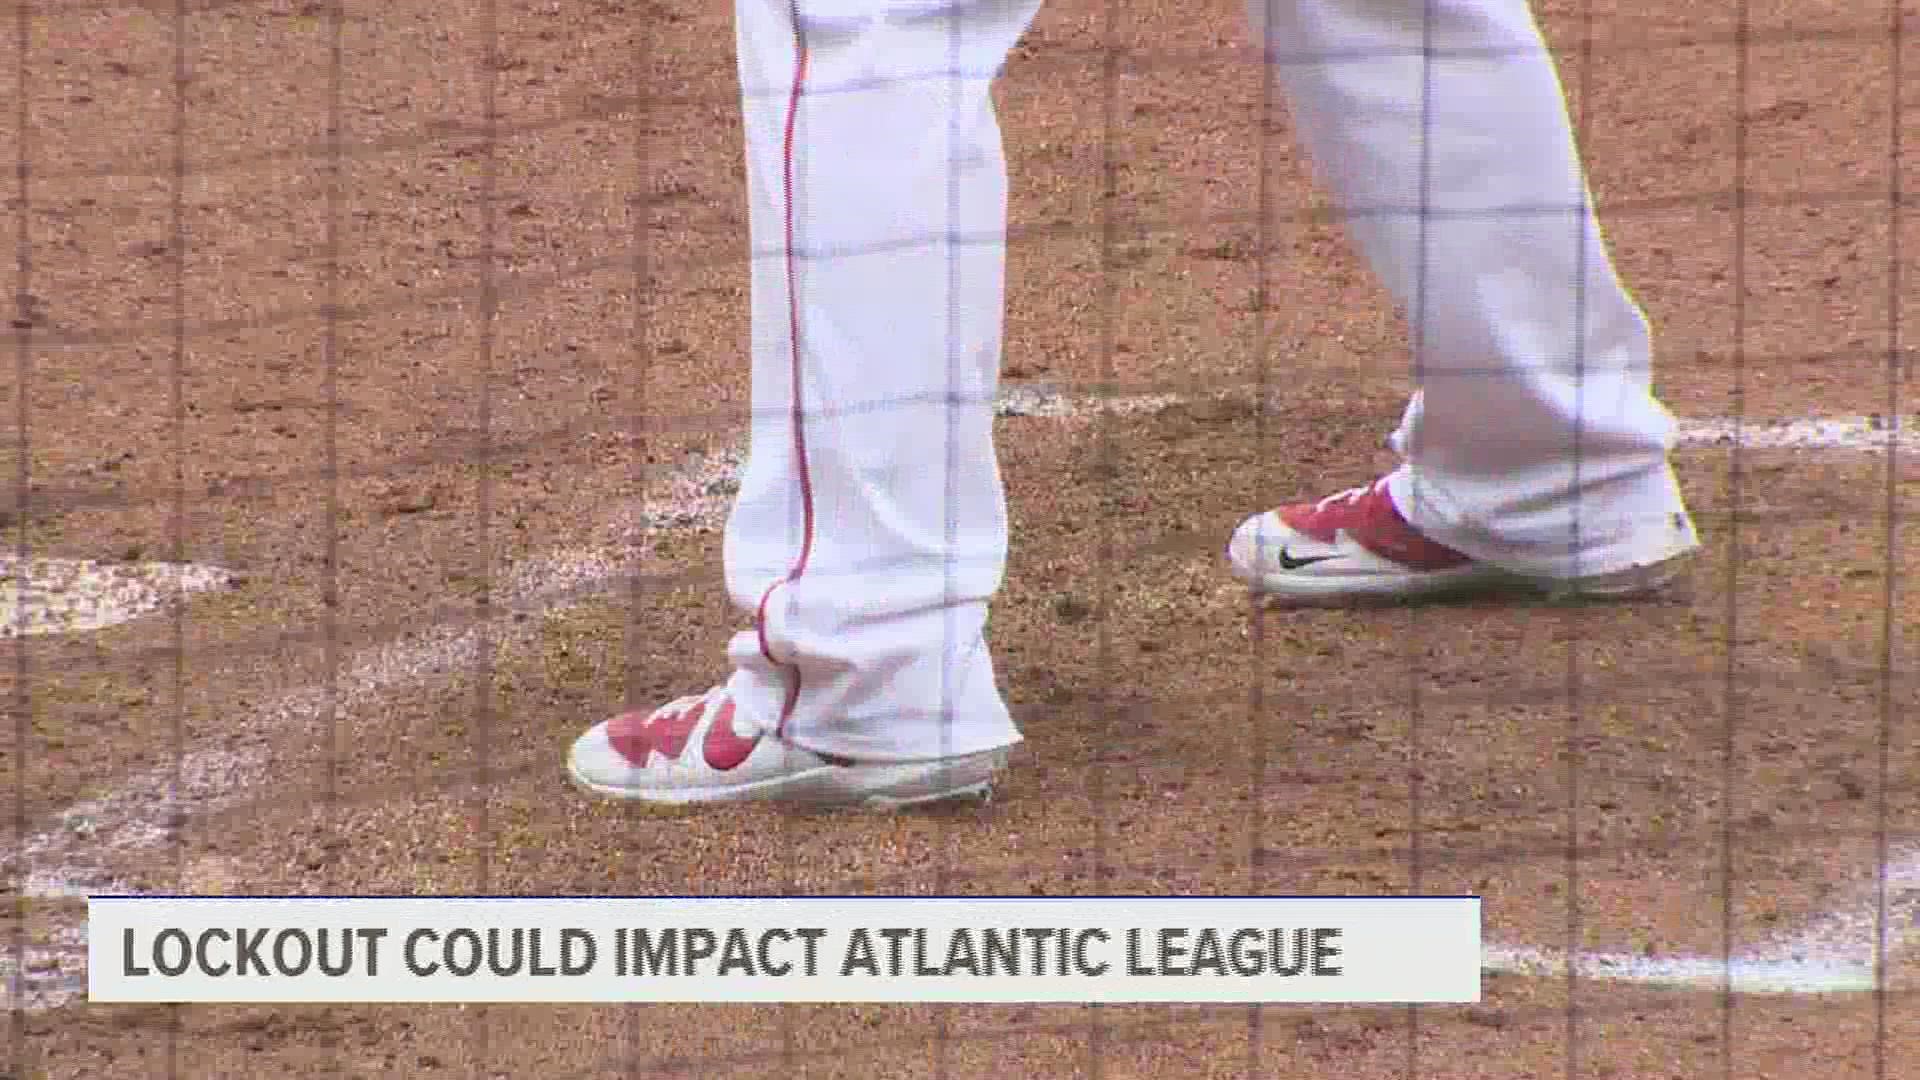 Rosters holes left by a lockout could pull players from the Atlantic League to the MiLB.